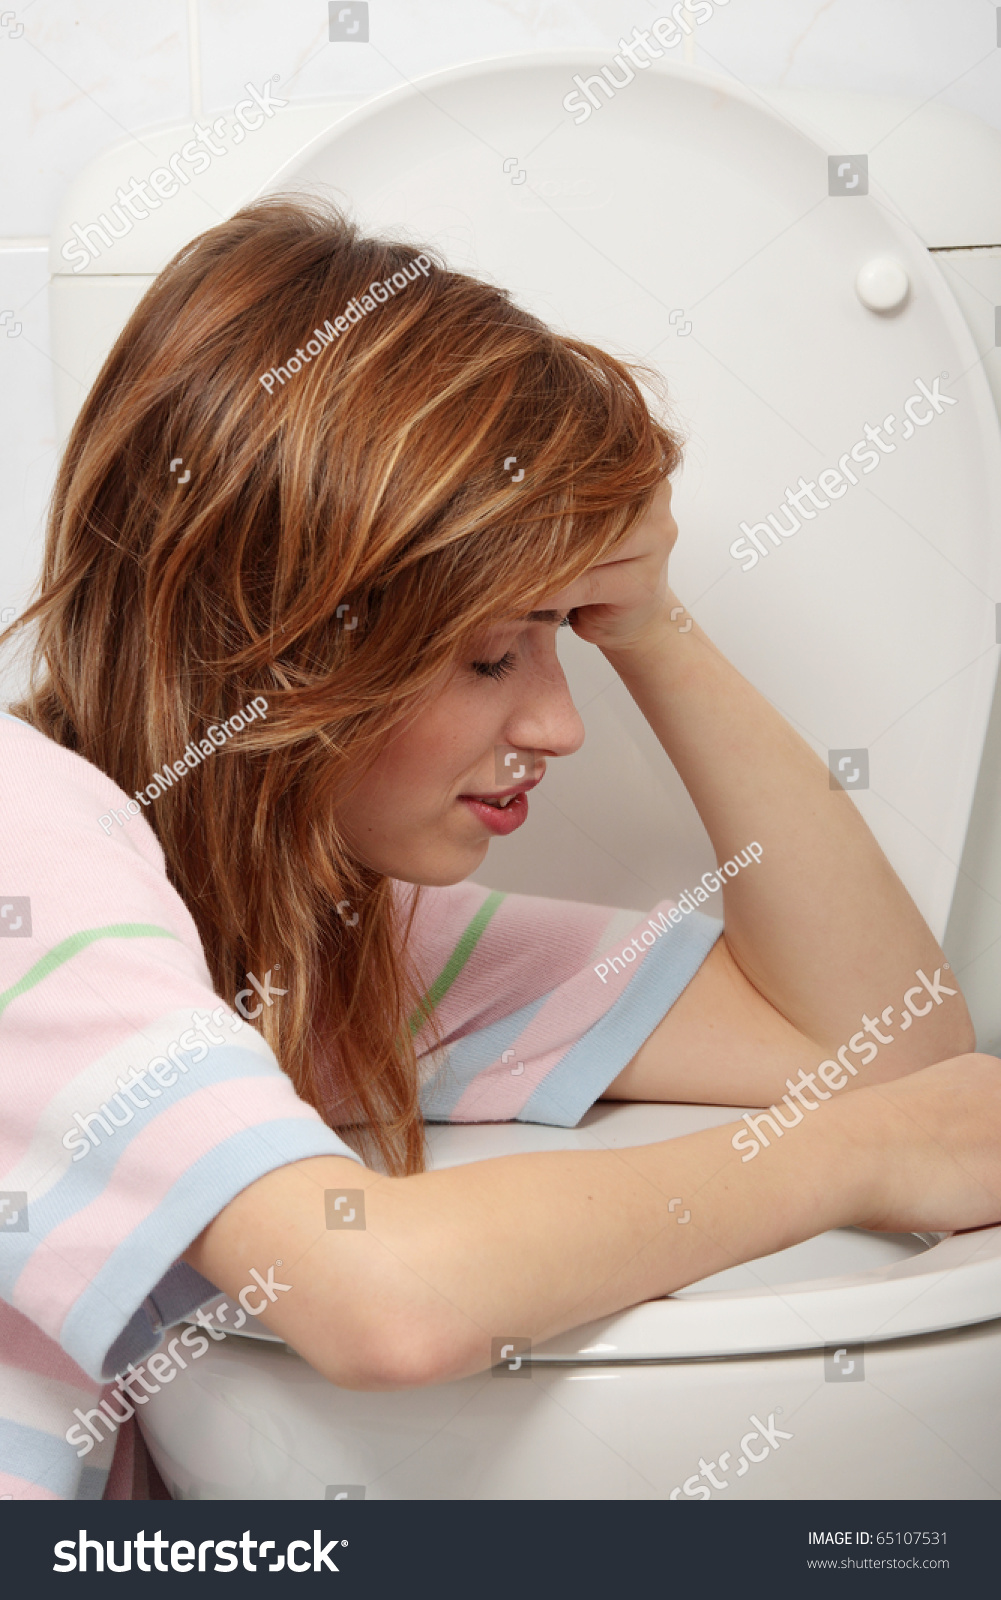 Young Teen Woman Vomiting Toilet Stock Photo (Edit Now 